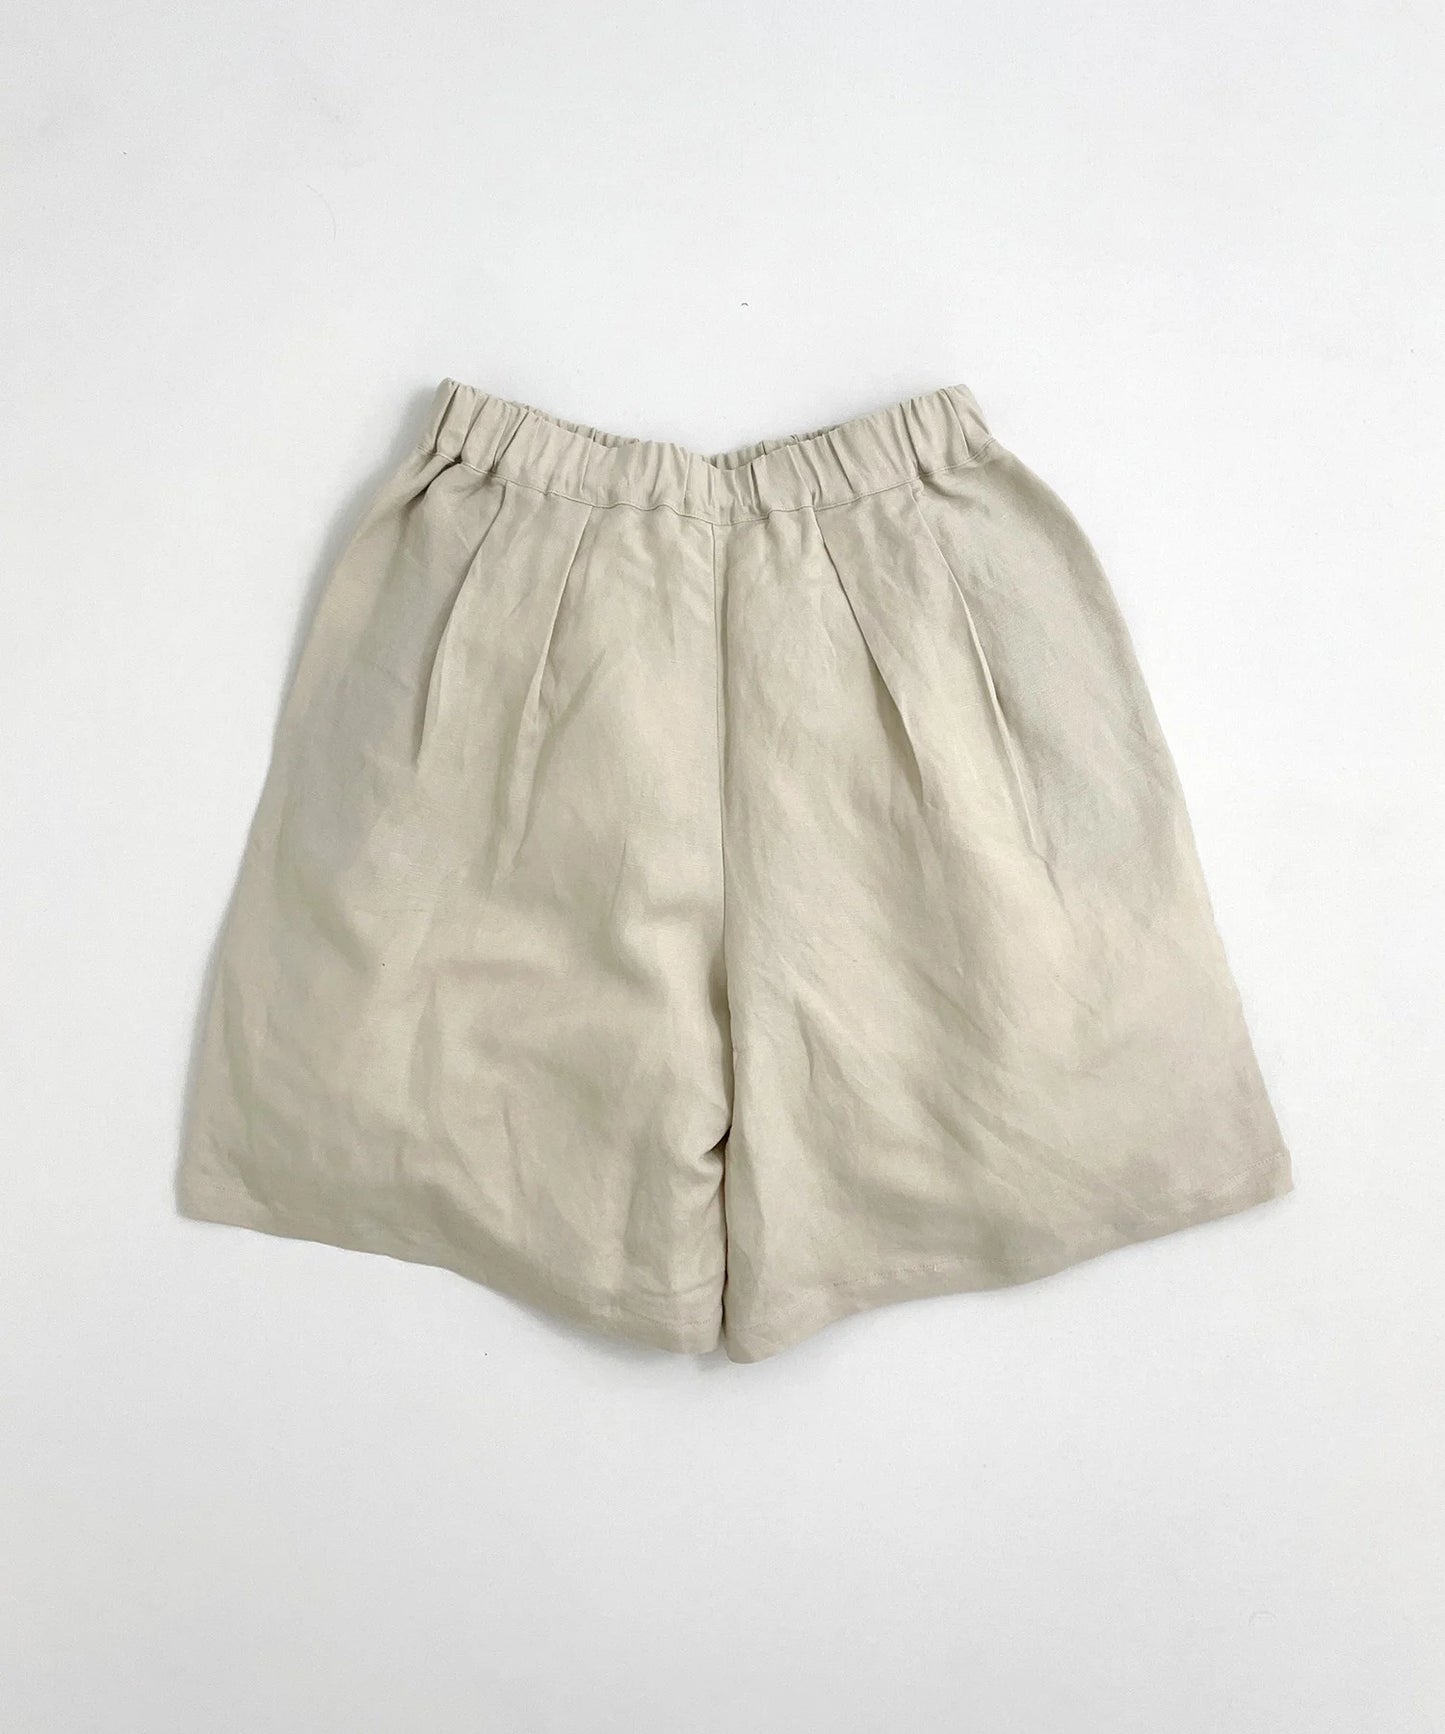 [Environmentally friendly material] LINEN/RAYON NEUTRAL SHORTS Cool touch feeling On/off use Setup compatible [145-175cm]